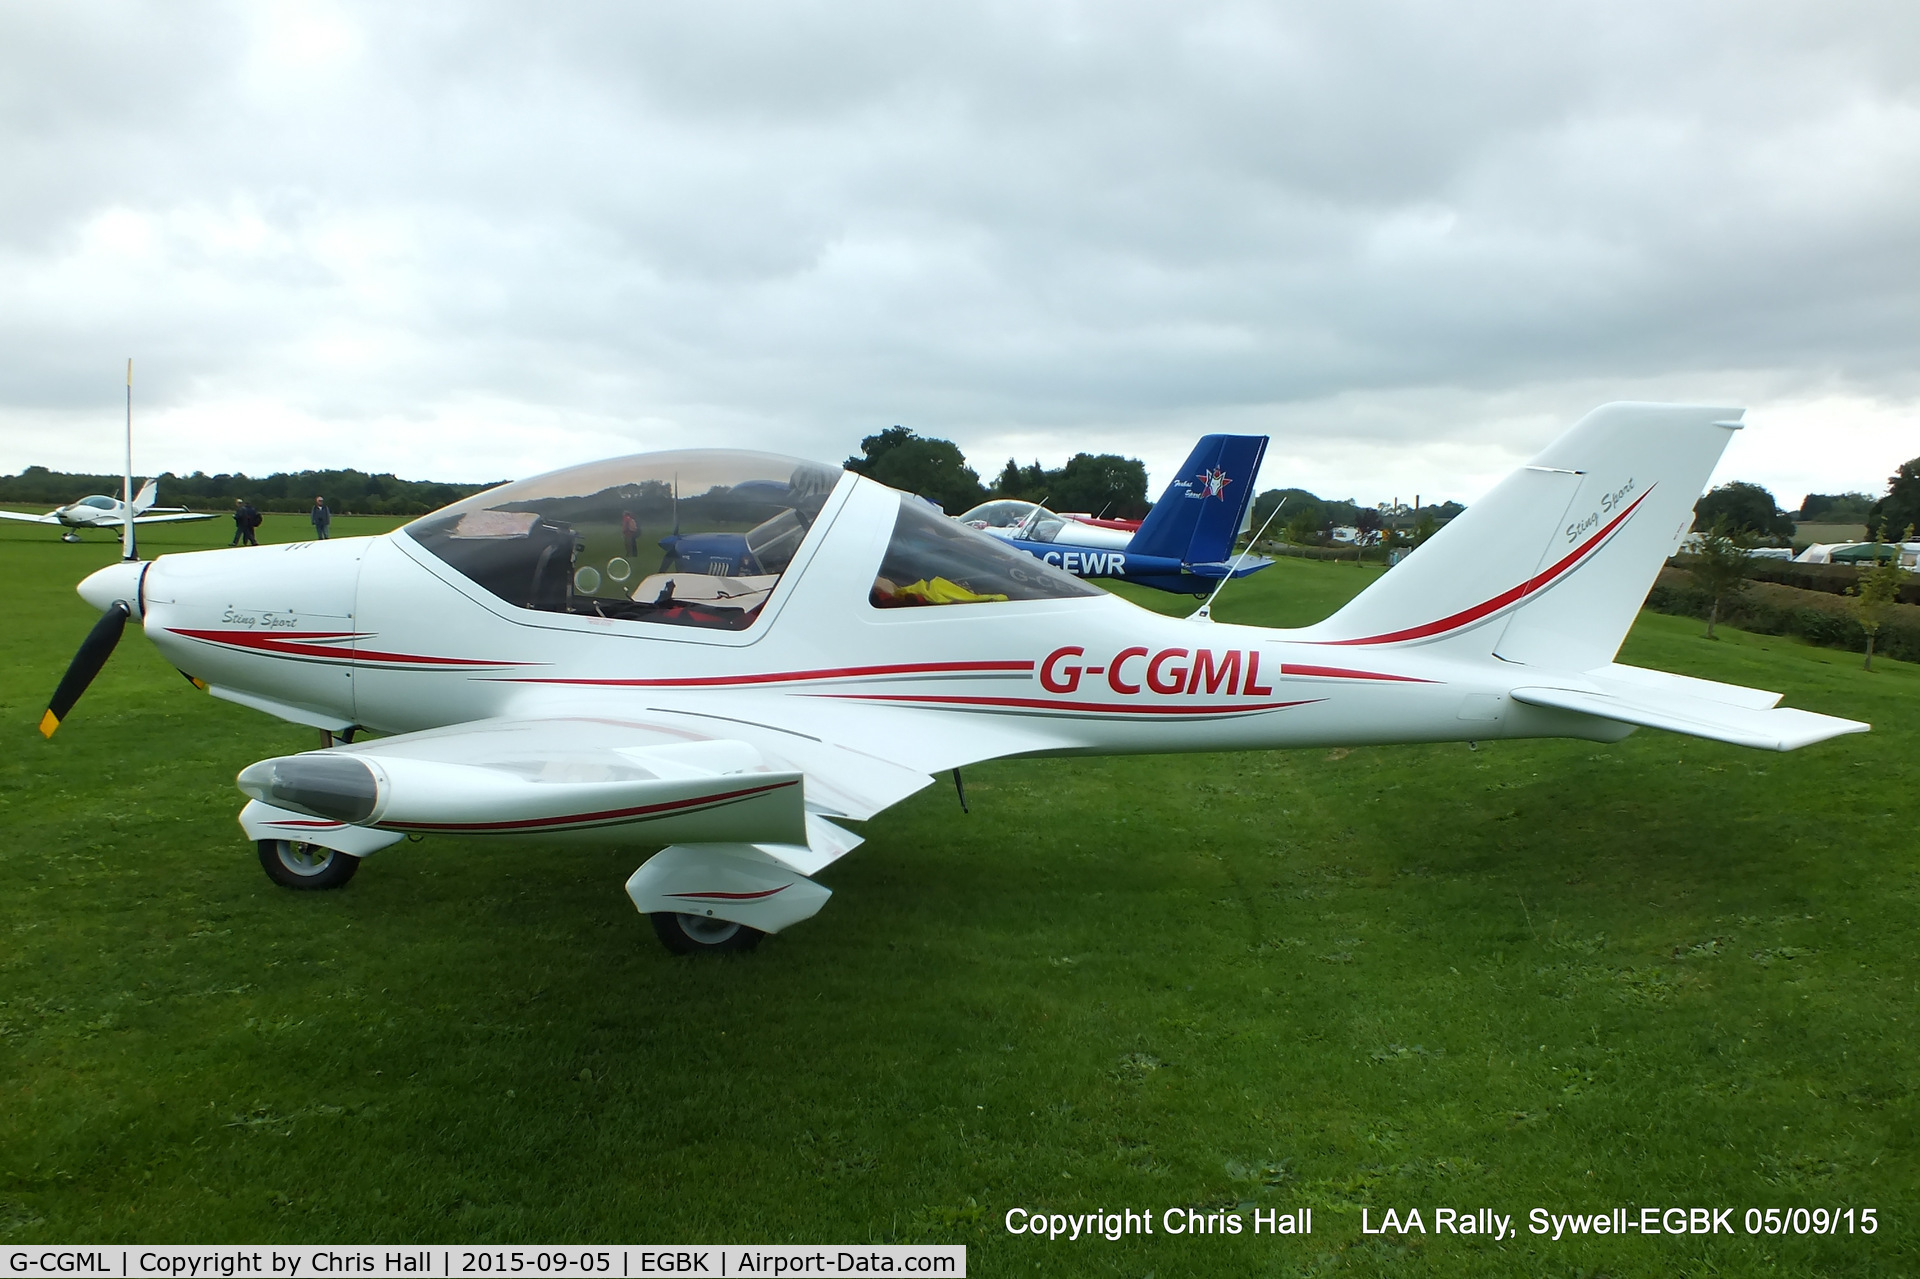 G-CGML, 2010 TL Ultralight TL-2000 Sting Carbon C/N LAA 347-14796, at the LAA Rally 2015, Sywell